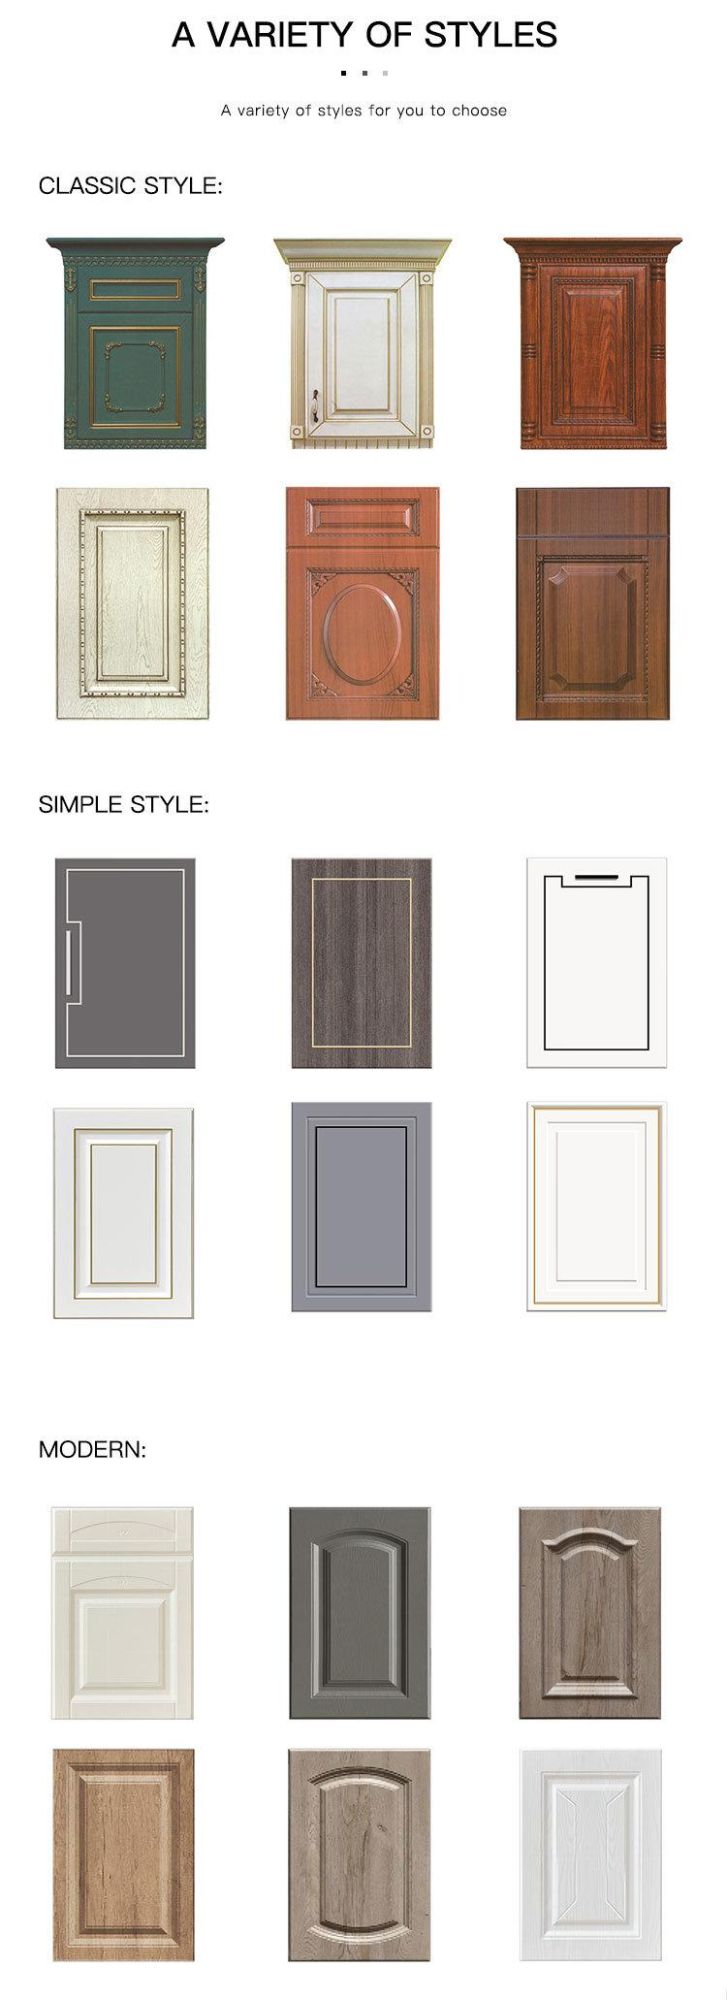 Custom Top Quality Solid Wood American Style Shaker Style Doors Kitchen Cabinets